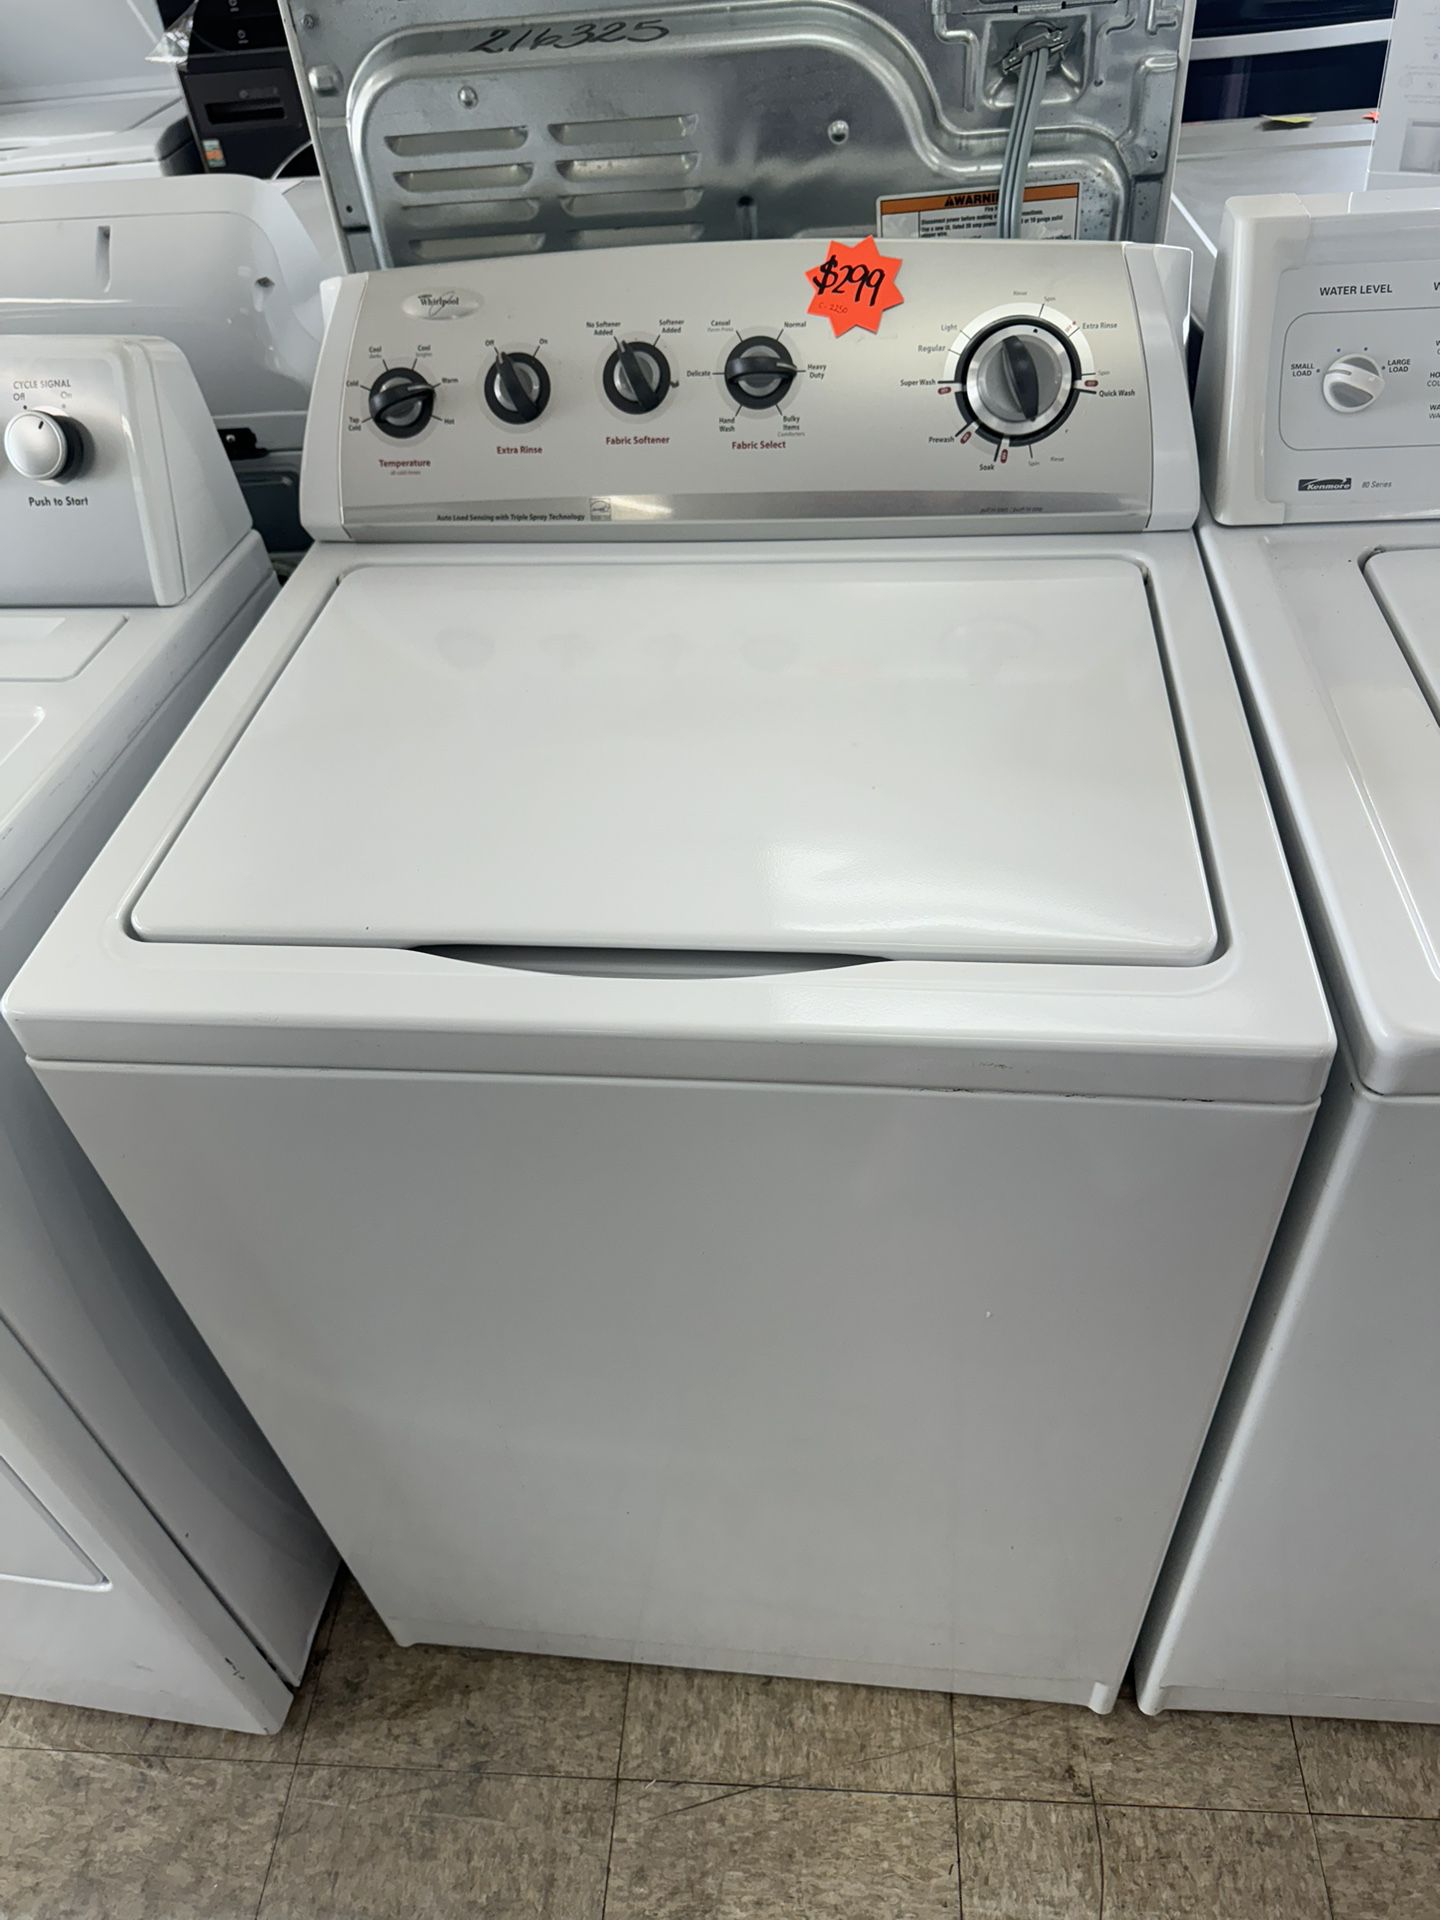 Whirlpool Top Load Washer With New Parts 